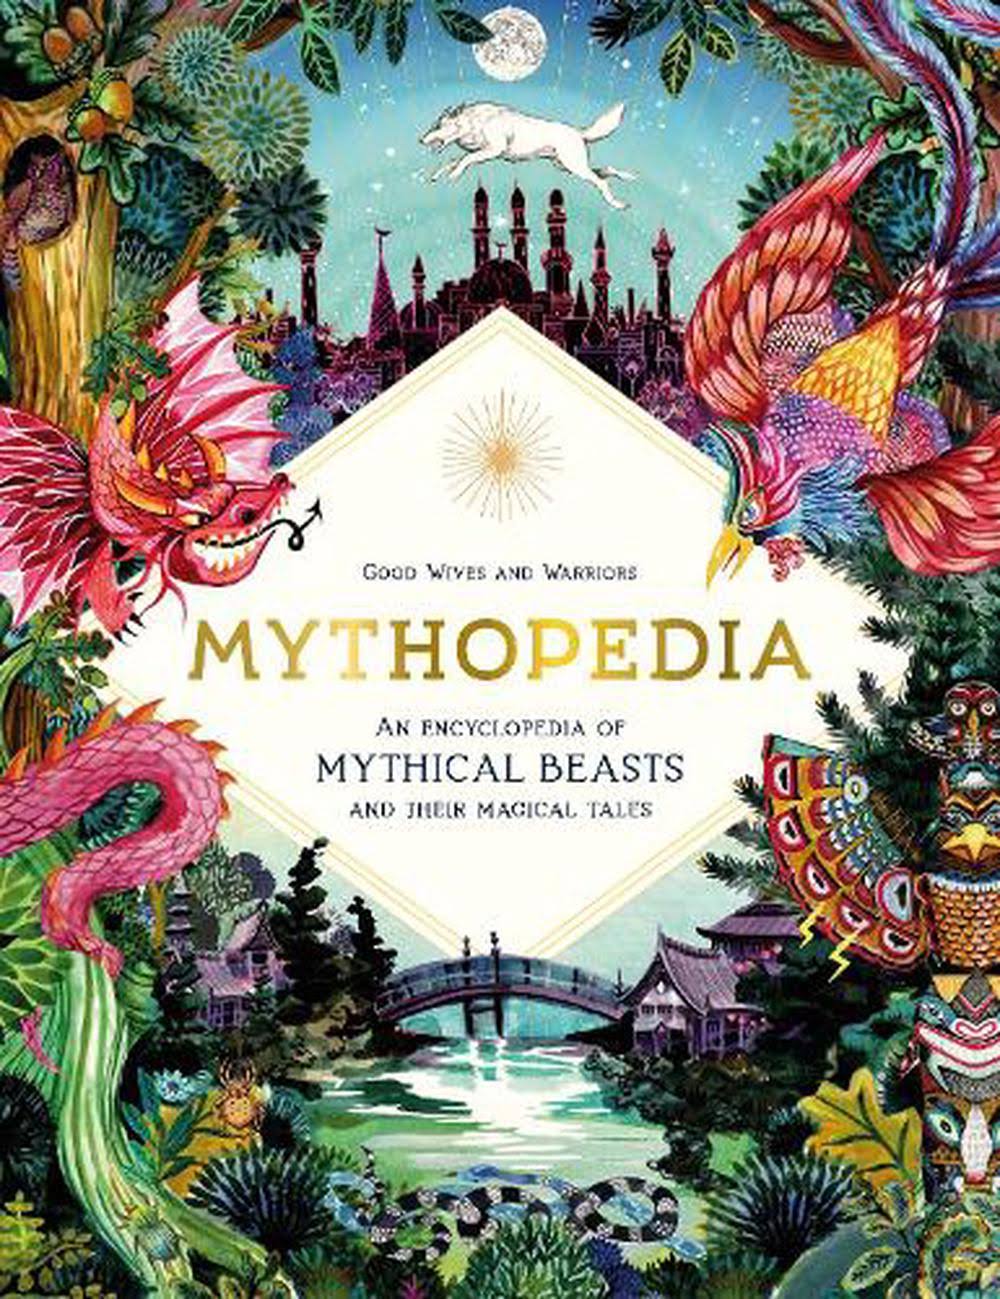 Mythopedia by Good Wives and Warriors